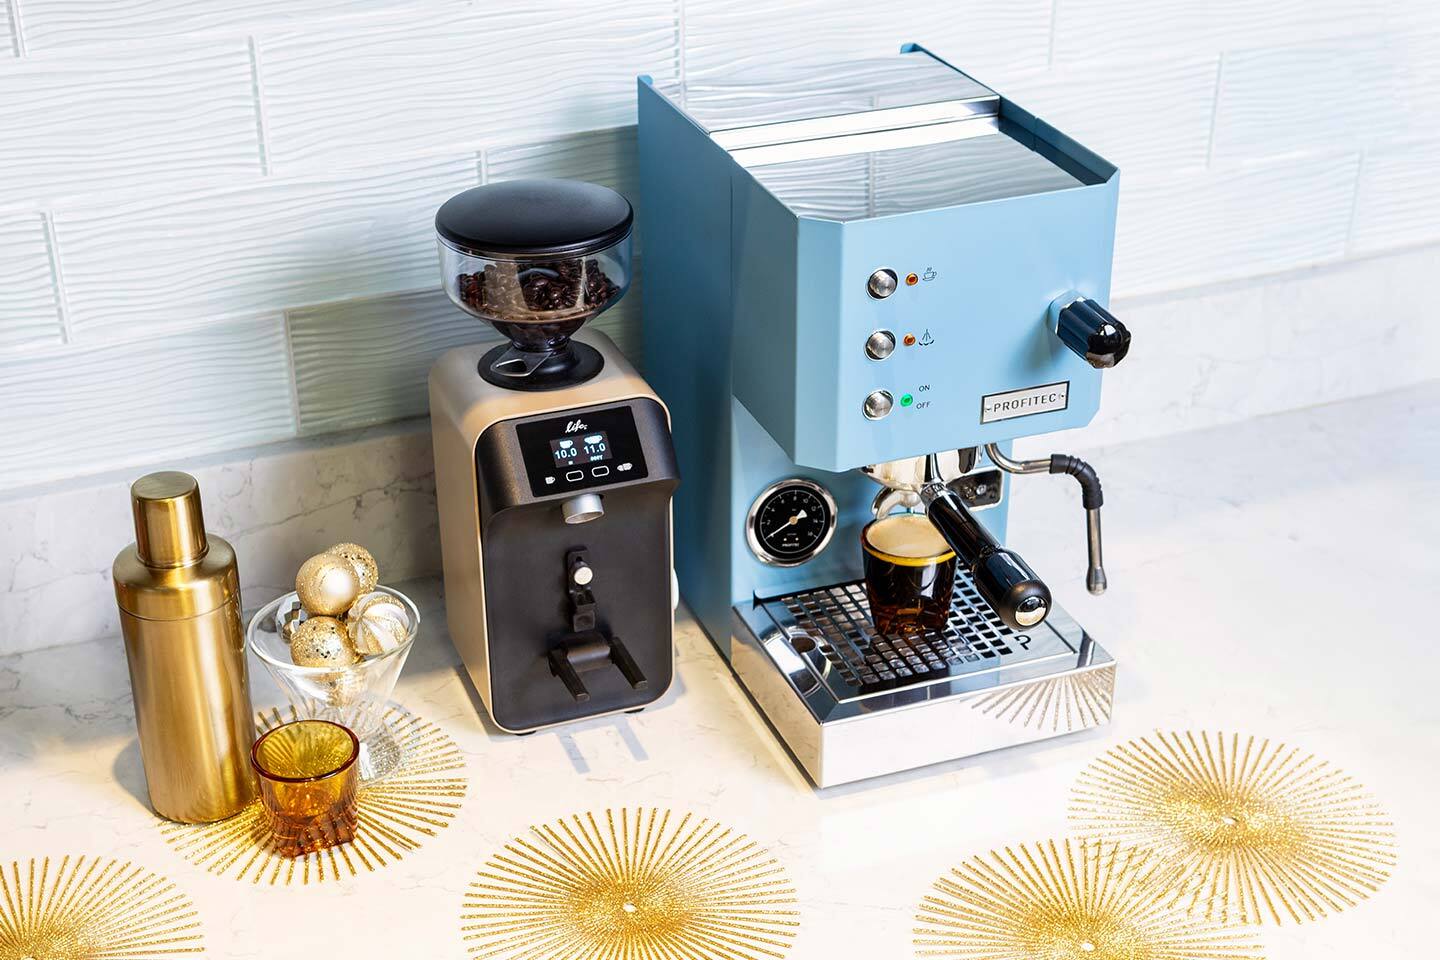 Espresso Recipes to Make your New Year’s Eve Party Pop!